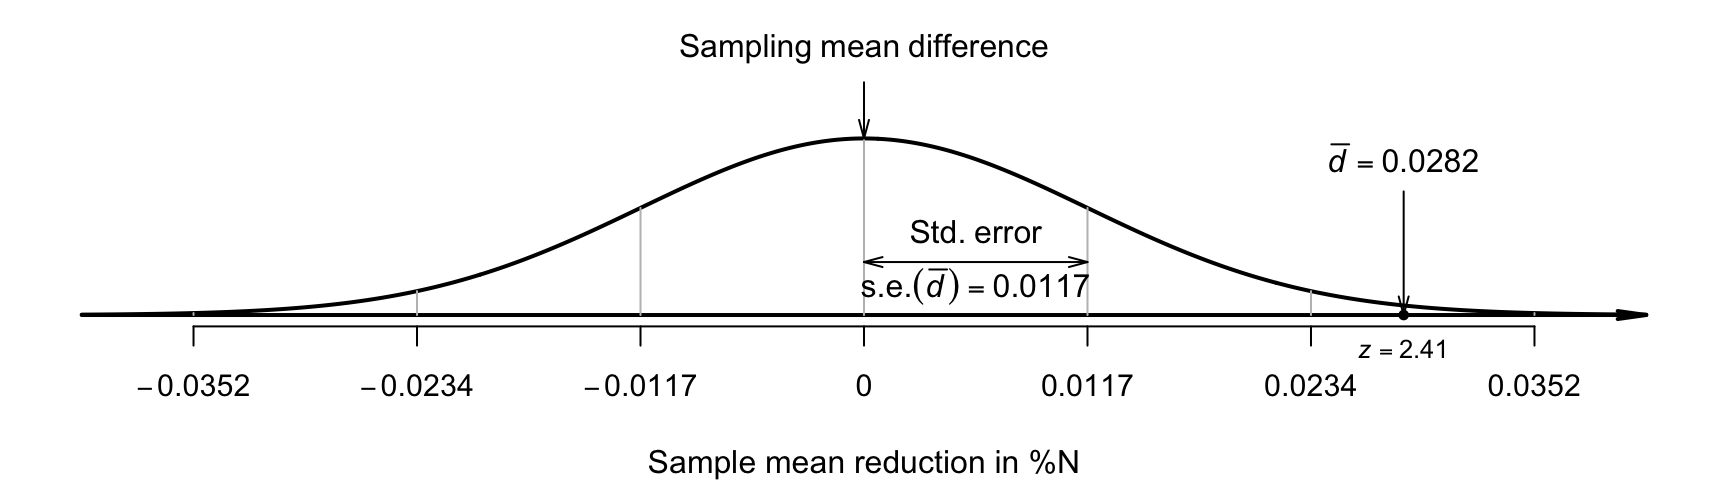 The sampling distribution is a normal distribution; it describes how the sample mean reduction in percentage N varies in samples of size $n = 28$ when the population mean reduction is $0$.